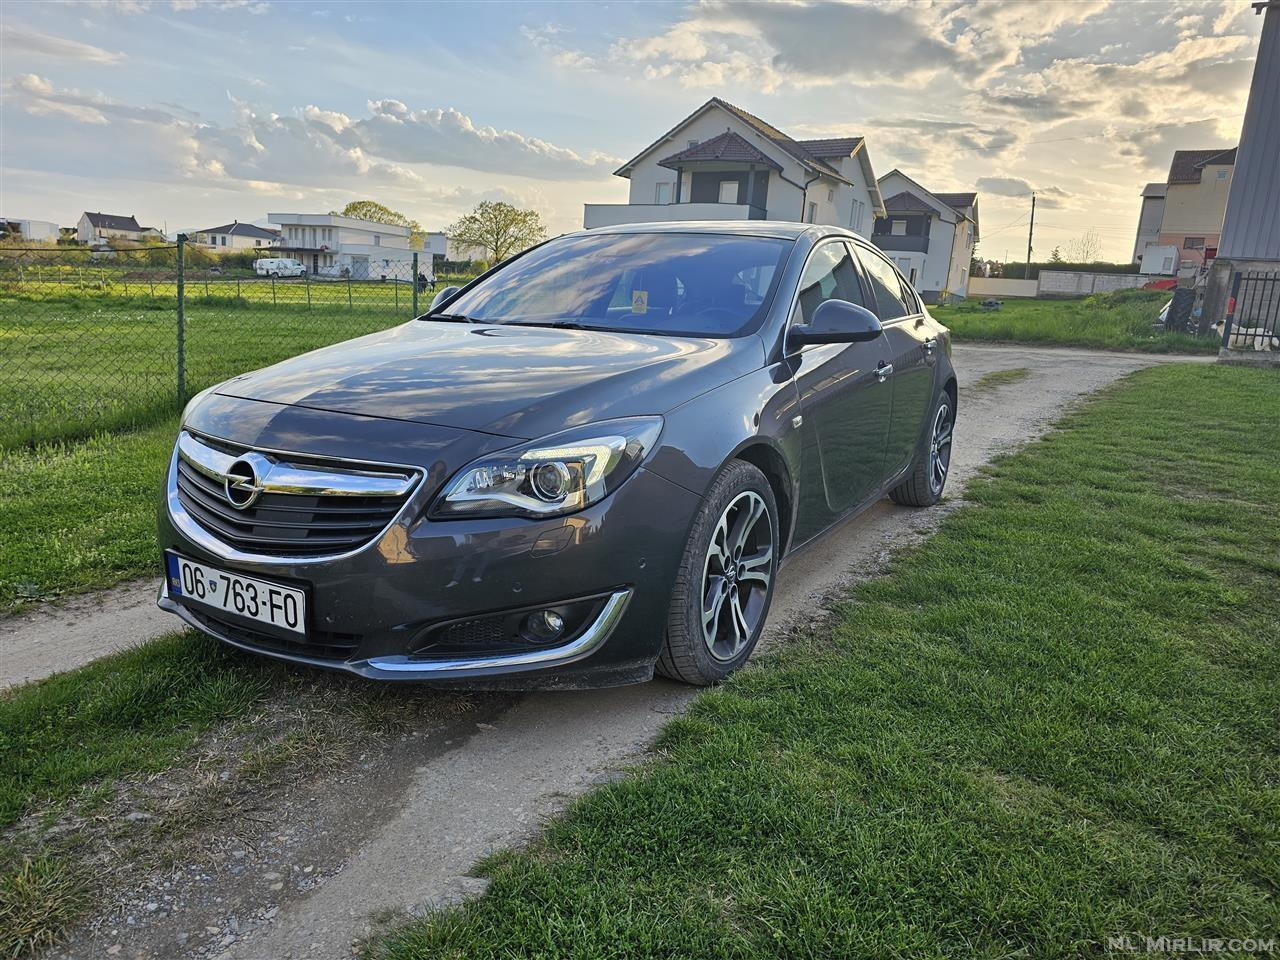 Shes Opel Insignia 2.0 Turbo 4X4 2014, 250 PS